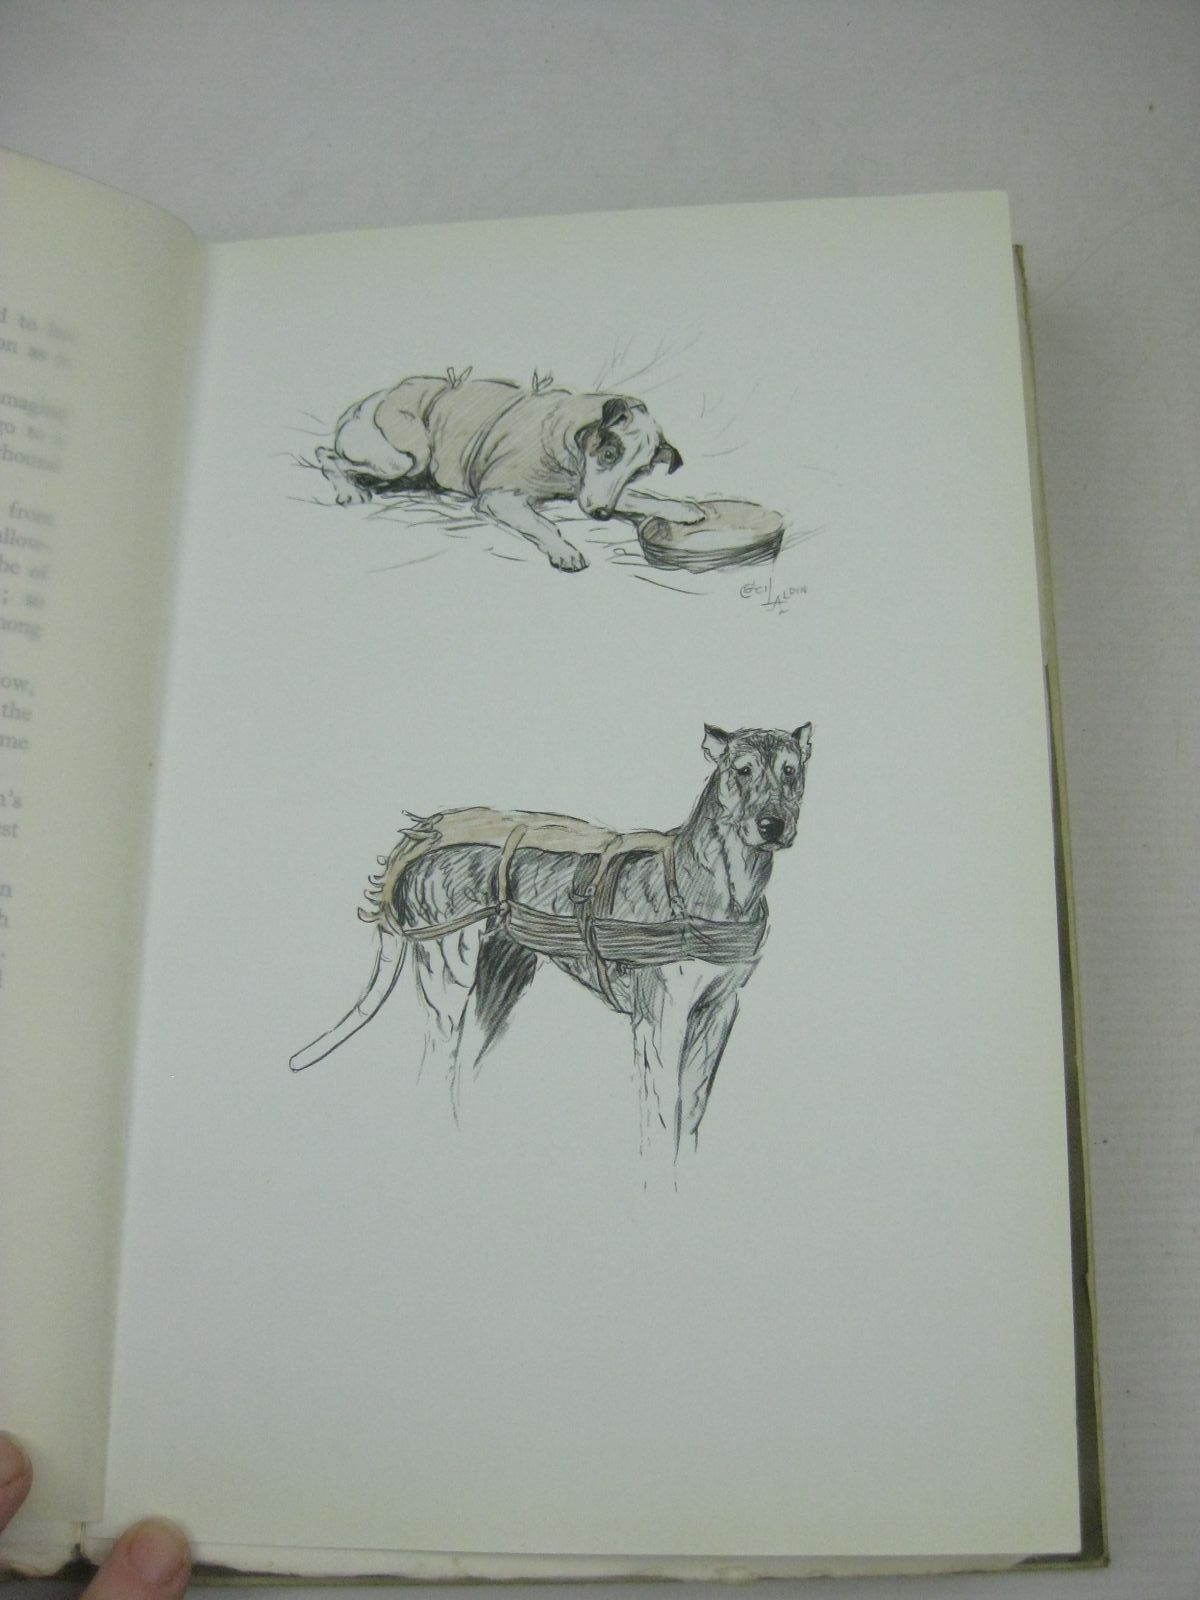 Photo of AN ARTIST'S MODELS written by Aldin, Cecil illustrated by Aldin, Cecil published by H. F. & G. Witherby (STOCK CODE: 1316213)  for sale by Stella & Rose's Books